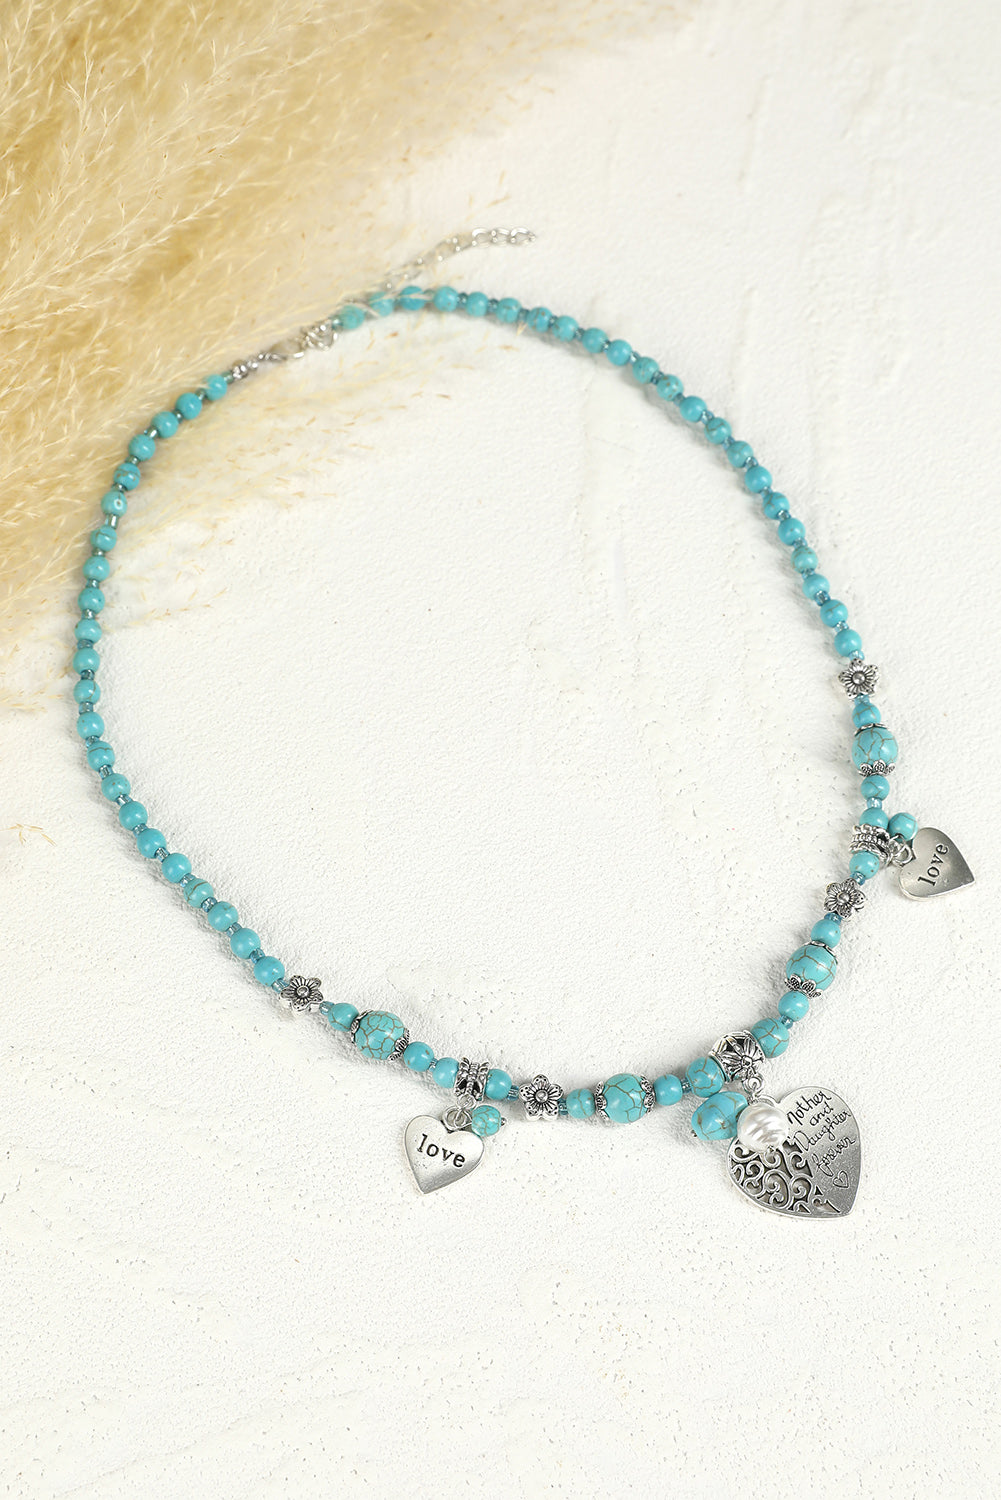 Turquoise Love Heart Pendant Beading Necklace